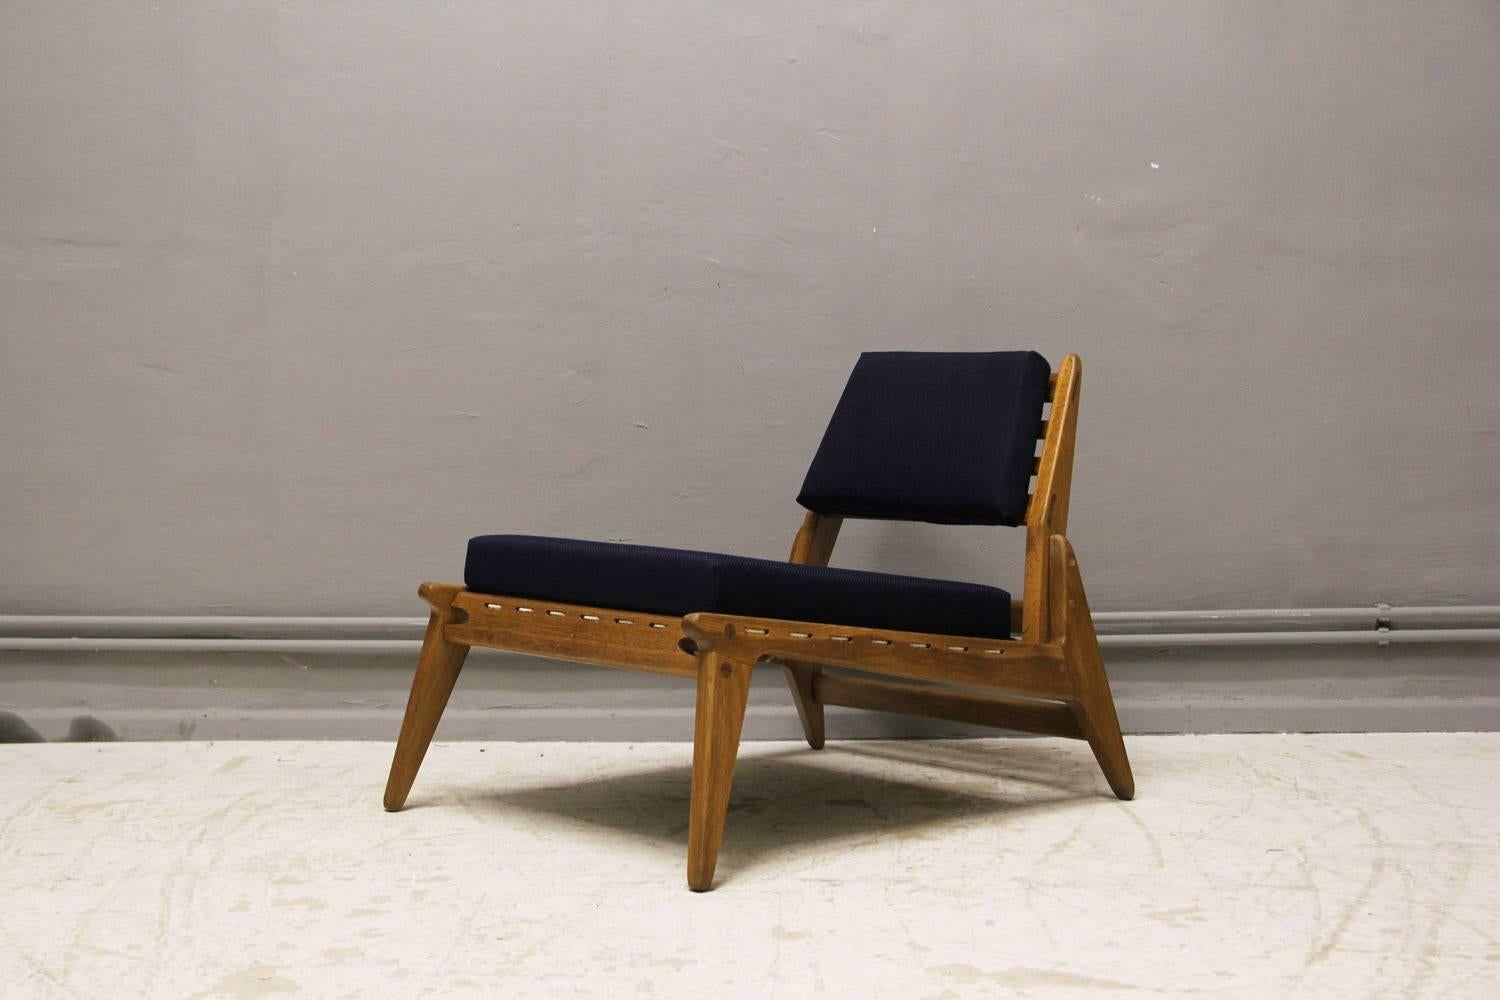 German Mid-Century hunting chair with ottoman from the 1950s in oak and night blue. Completely restored and newly reupholstered. Excellent condition!